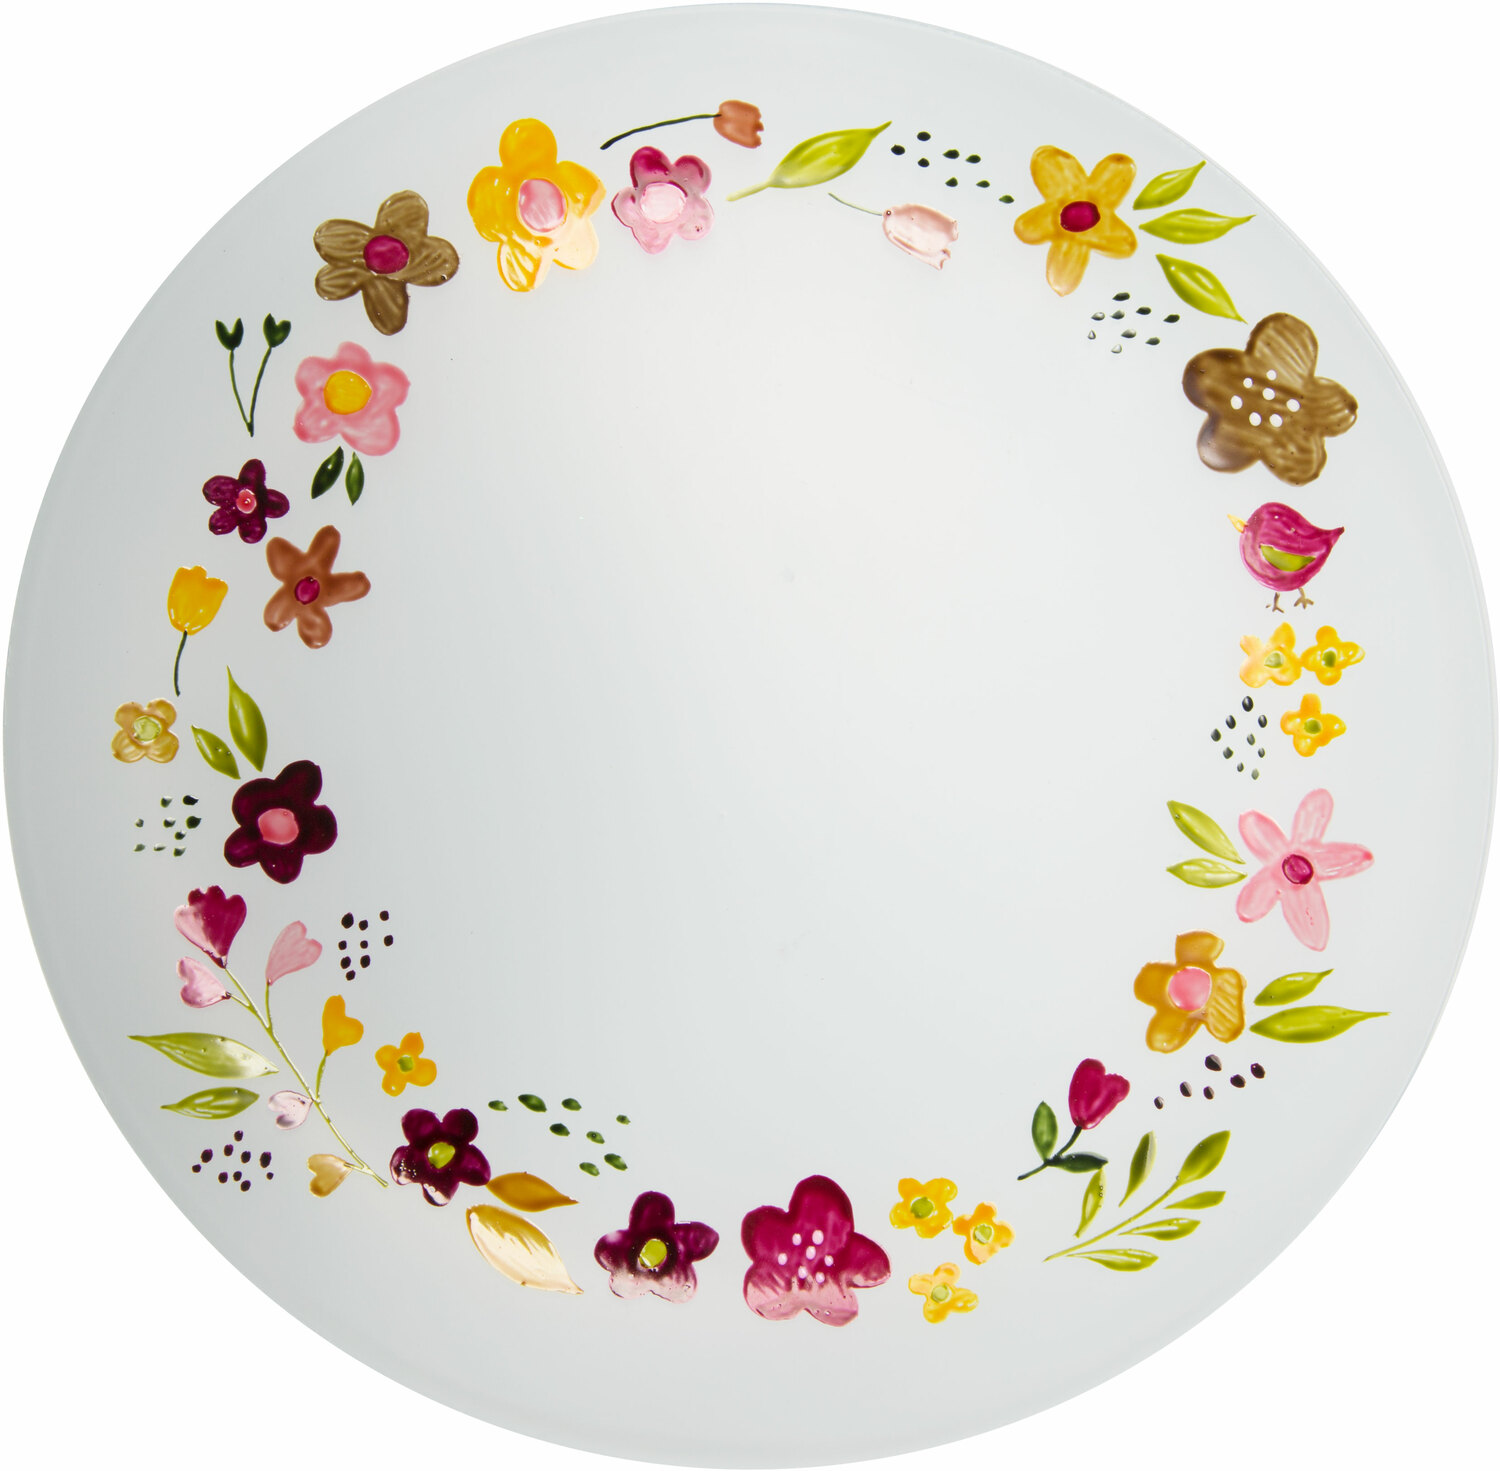 Floral Wreath by Bless My Bloomers - Floral Wreath - Candle Tray